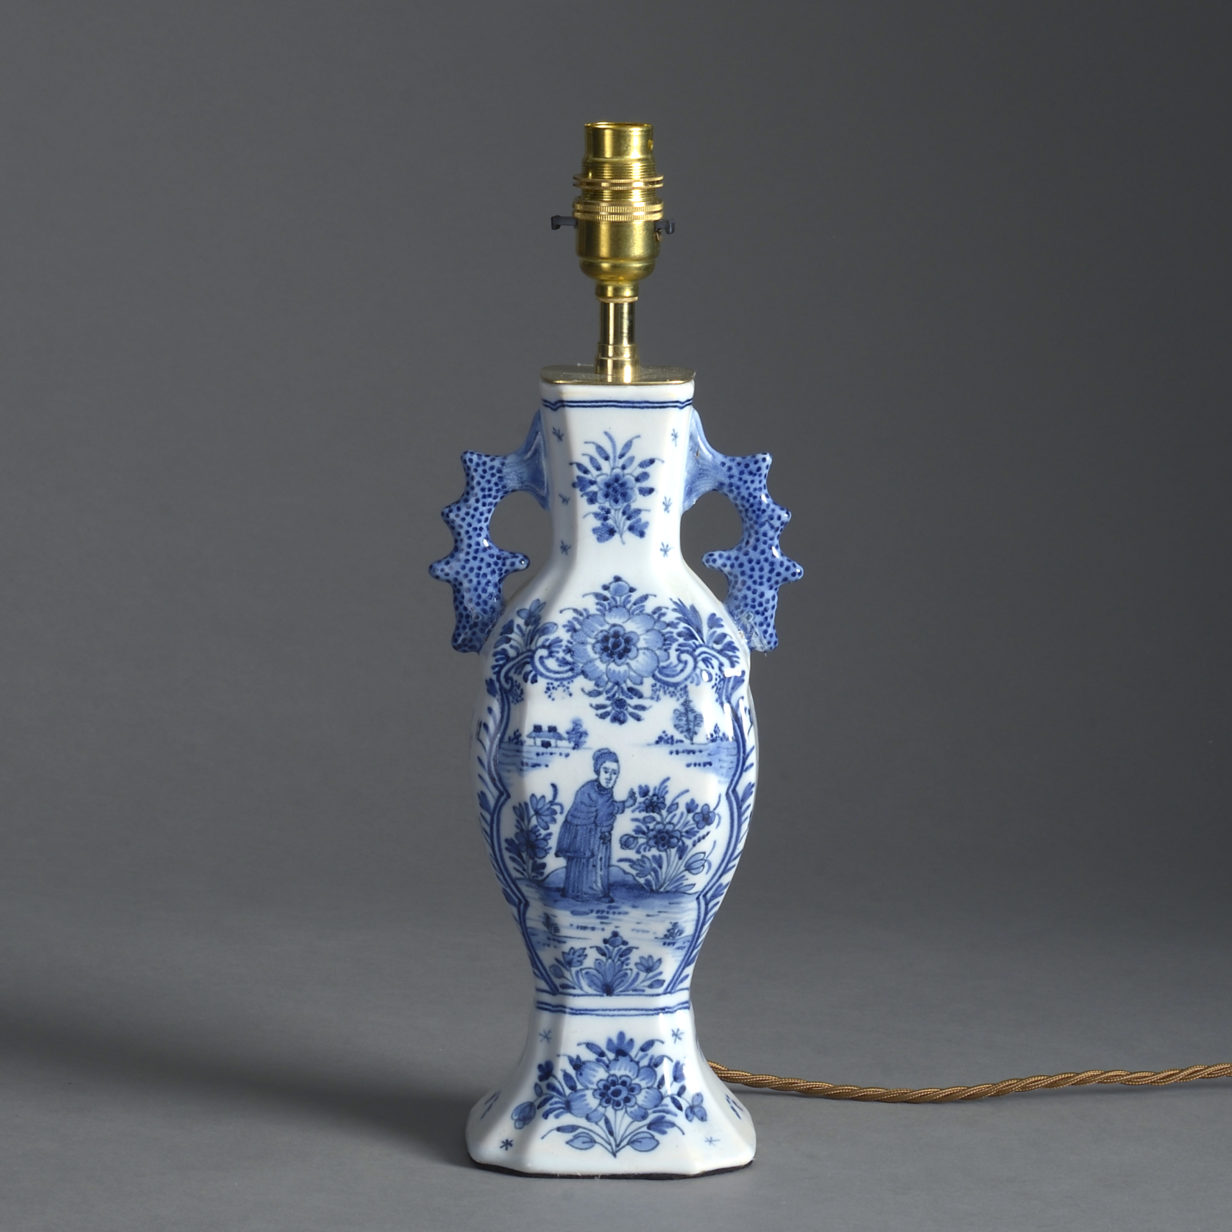 An early 20th century blue and white delft vase lamp